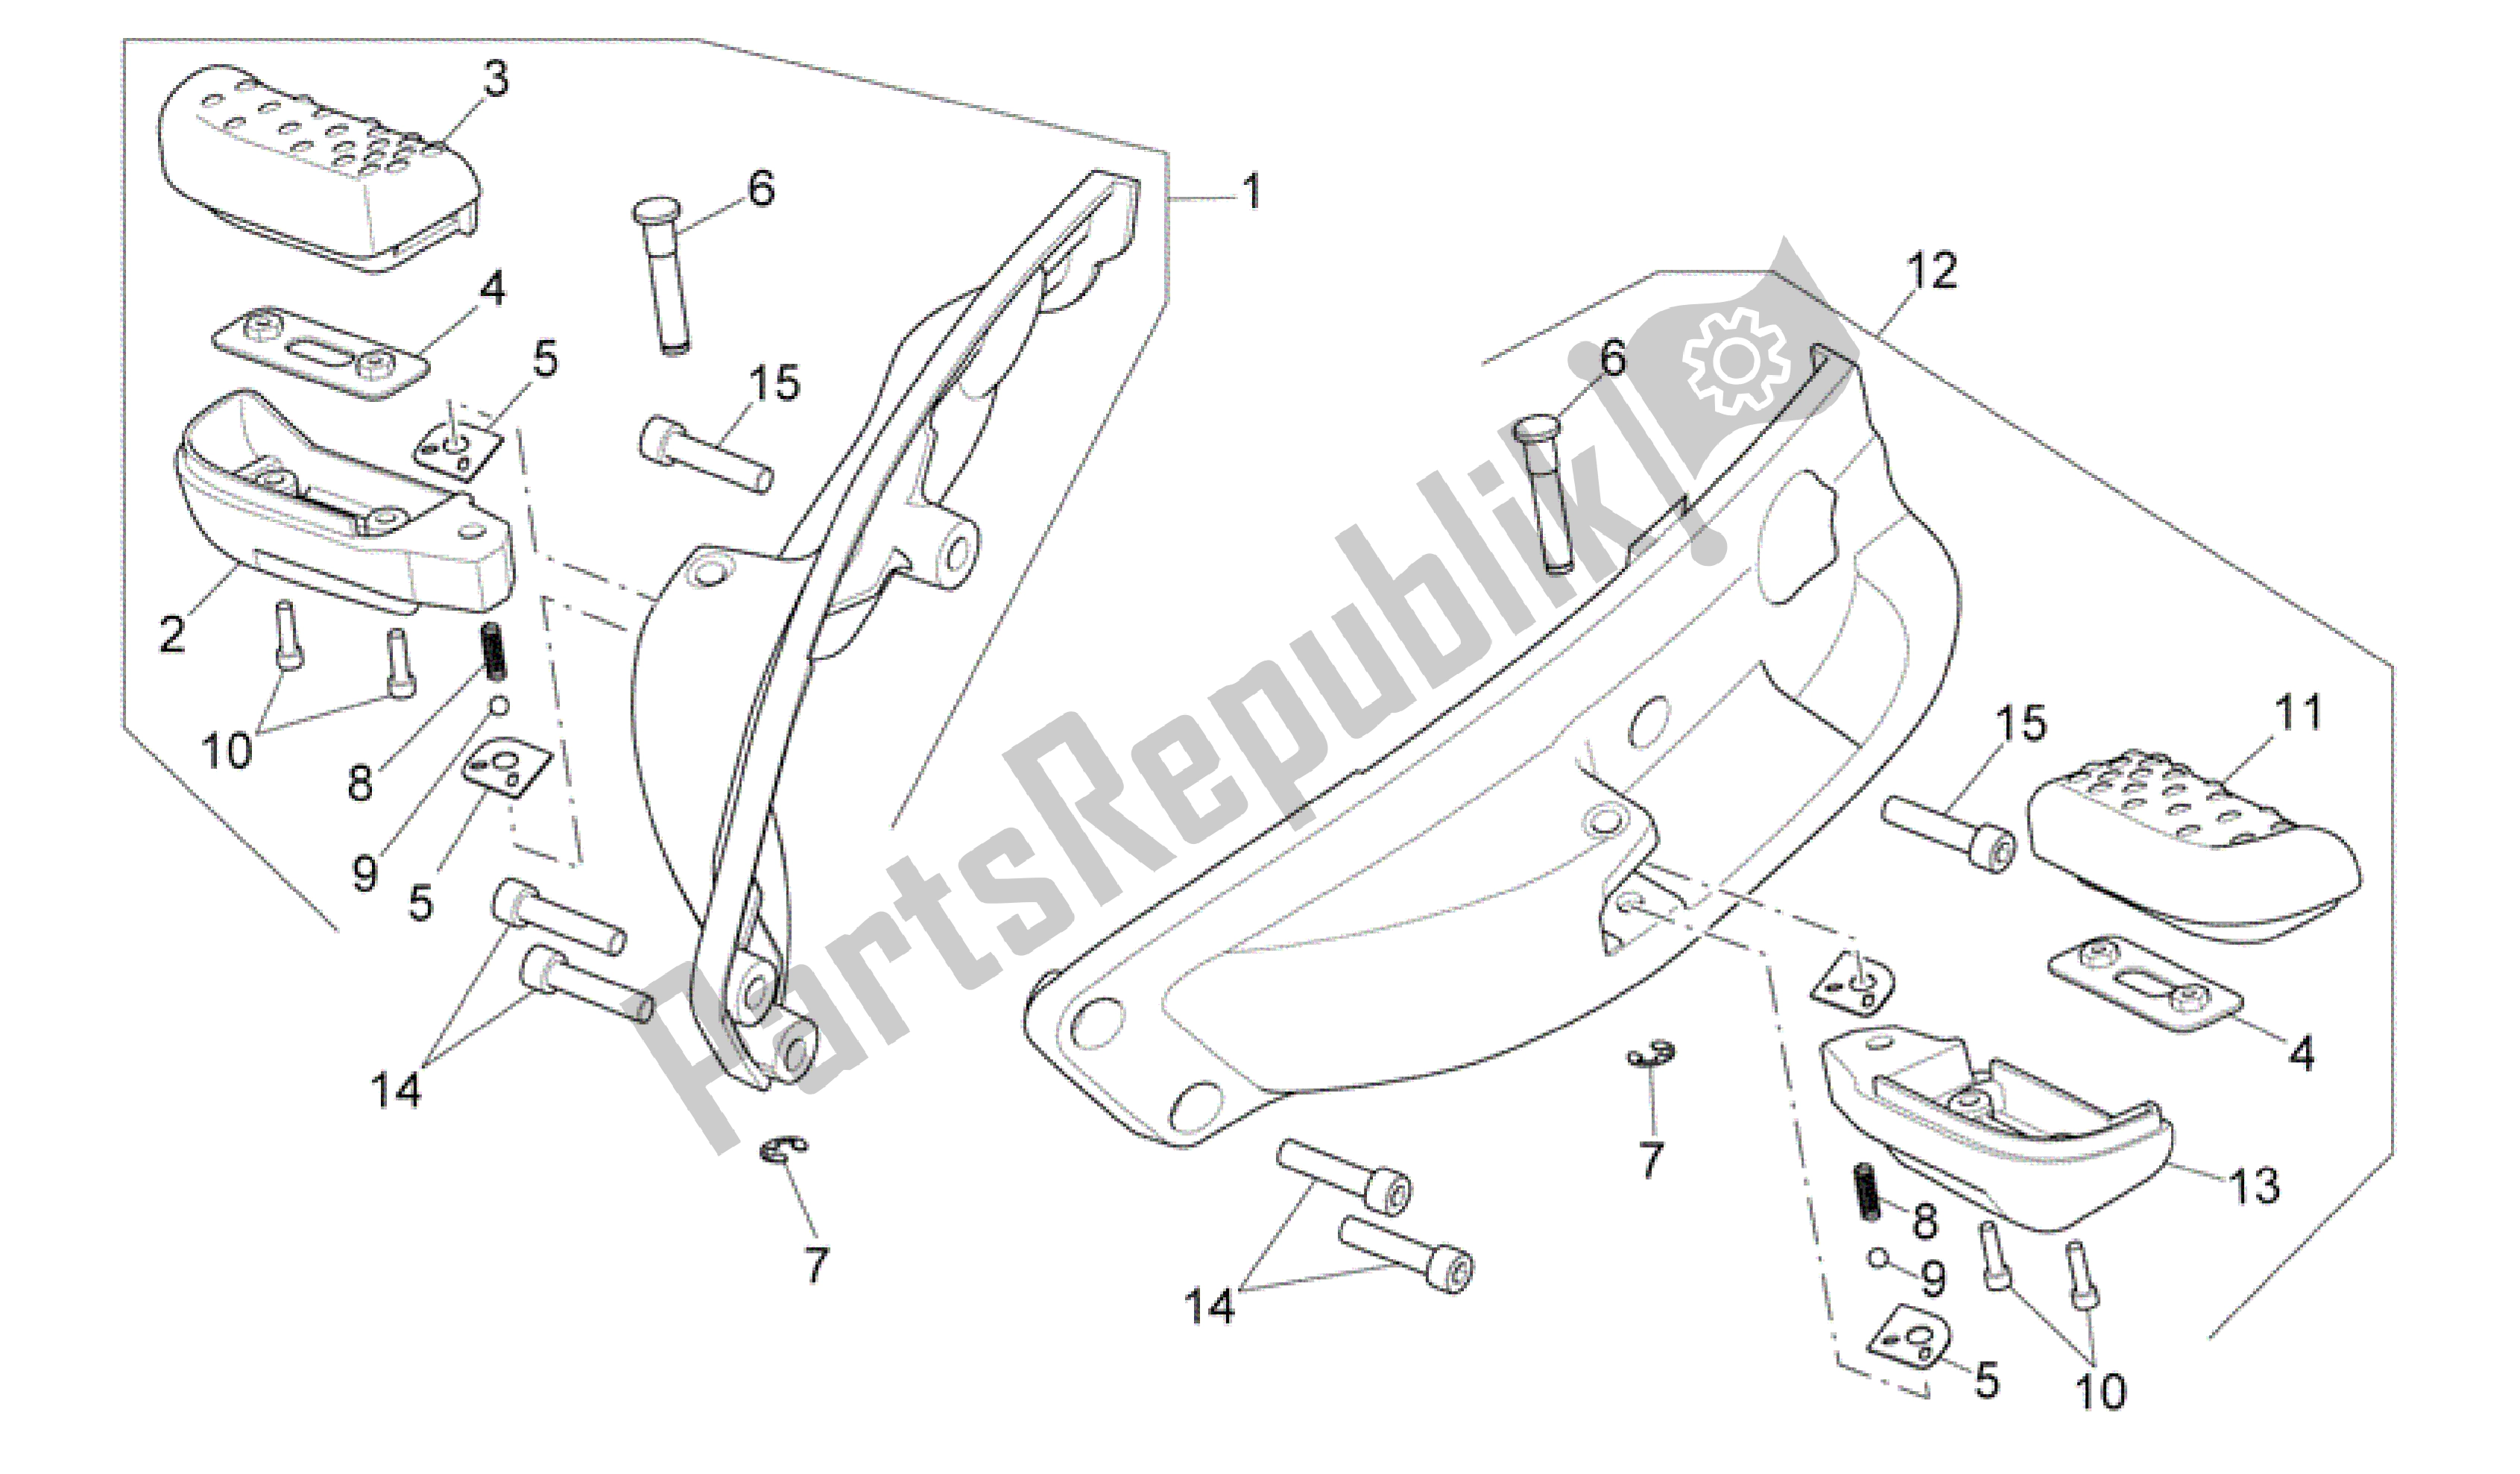 All parts for the Foot Rests of the Aprilia Scarabeo 492 2006 - 2008